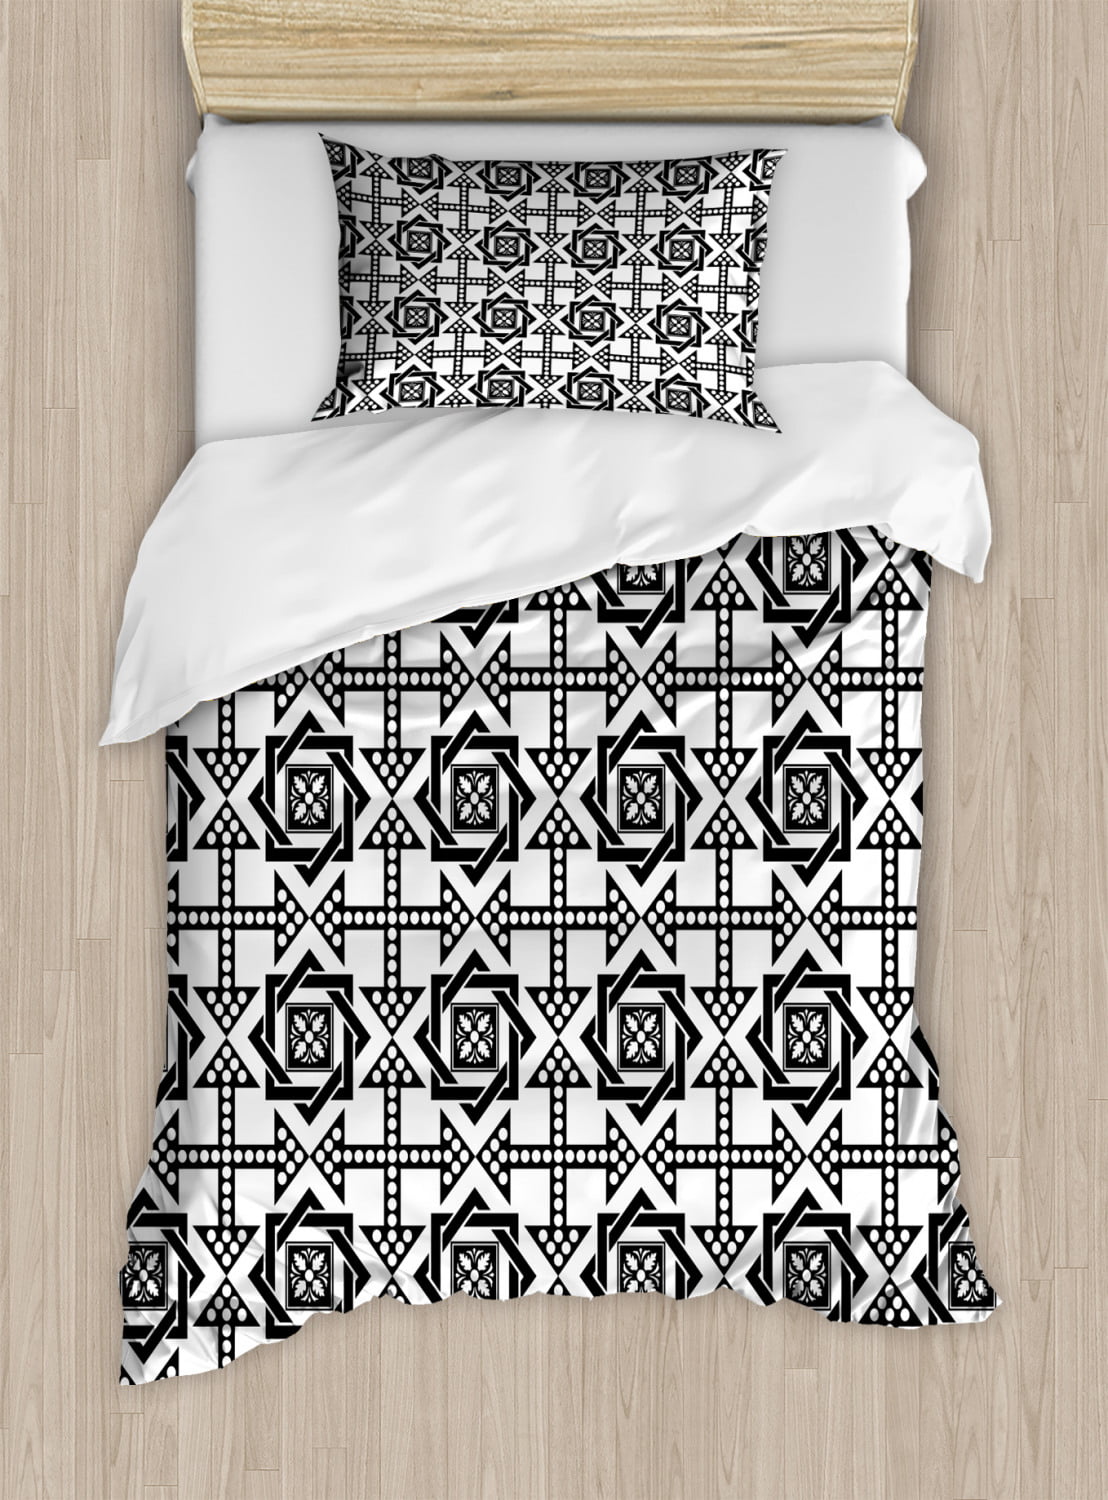 Black And White Twin Size Duvet Cover Set Celtic Star Pattern